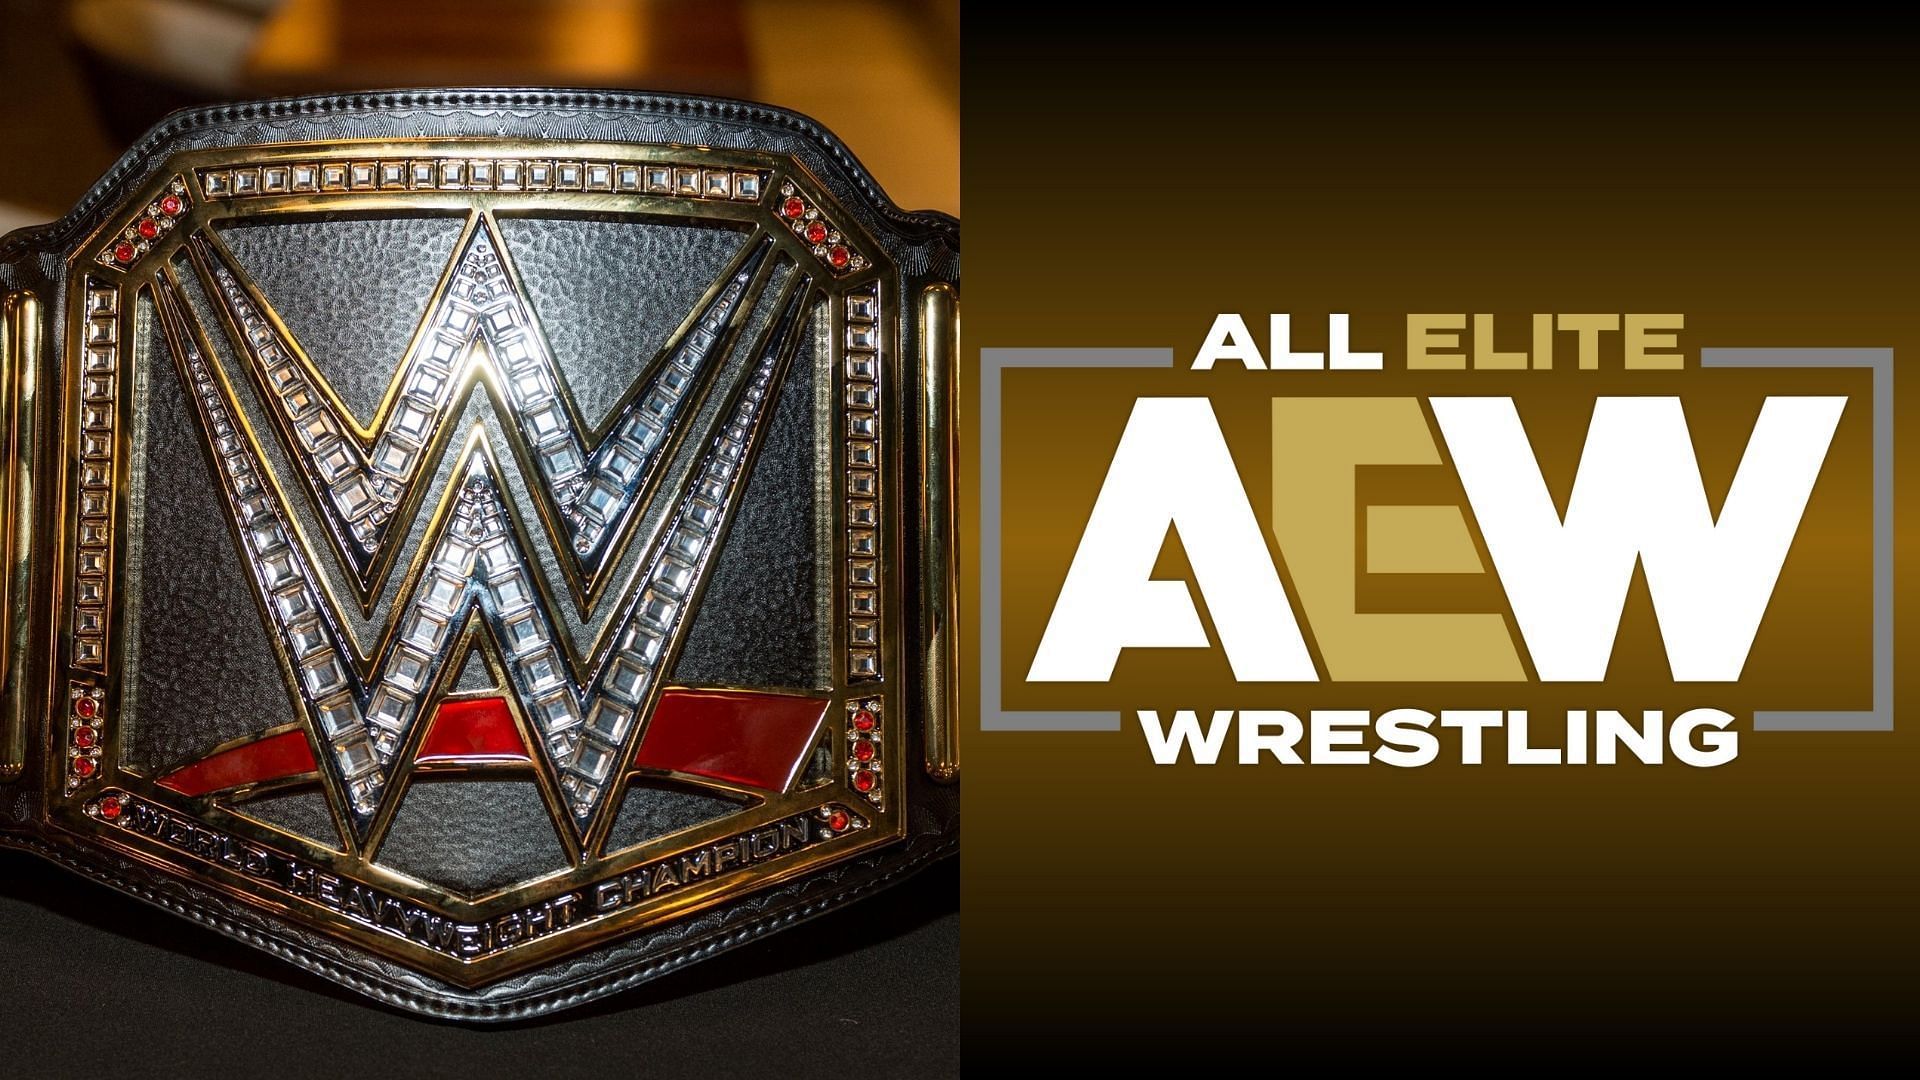 These are exciting times for AEW.